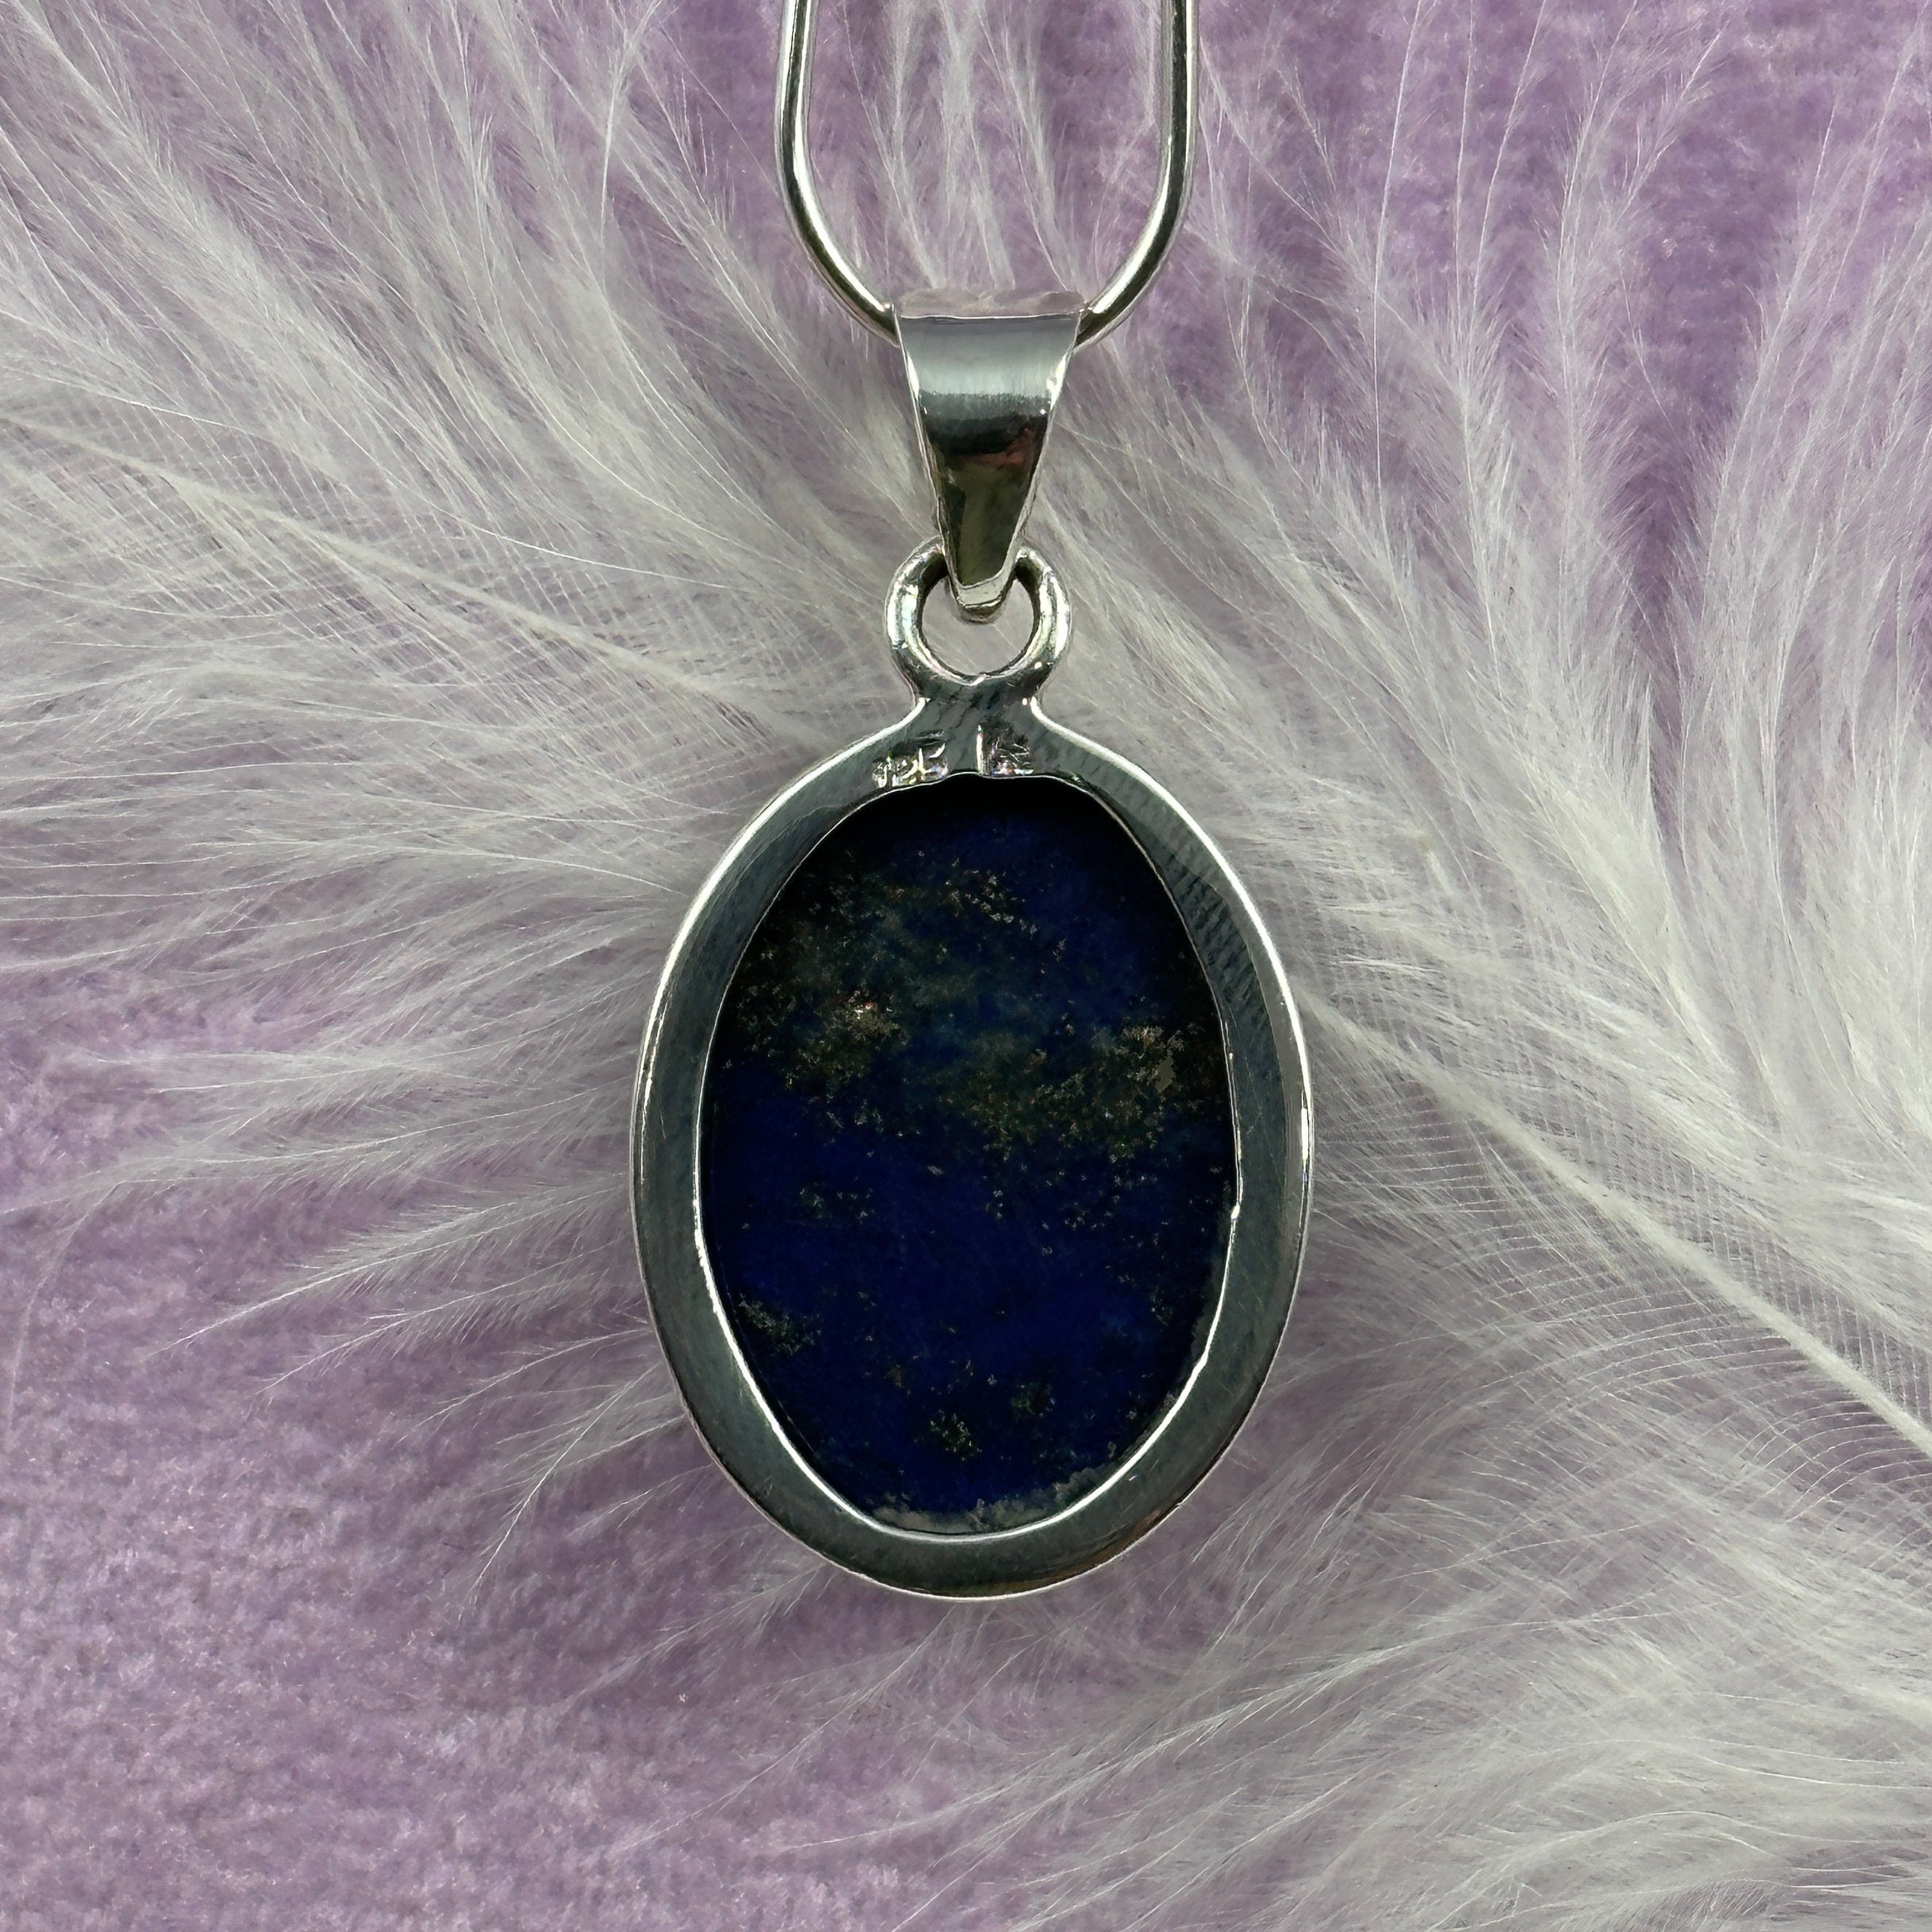 925 Silver faceted Lapis Lazuli crystal pendant 5.5g SN54331